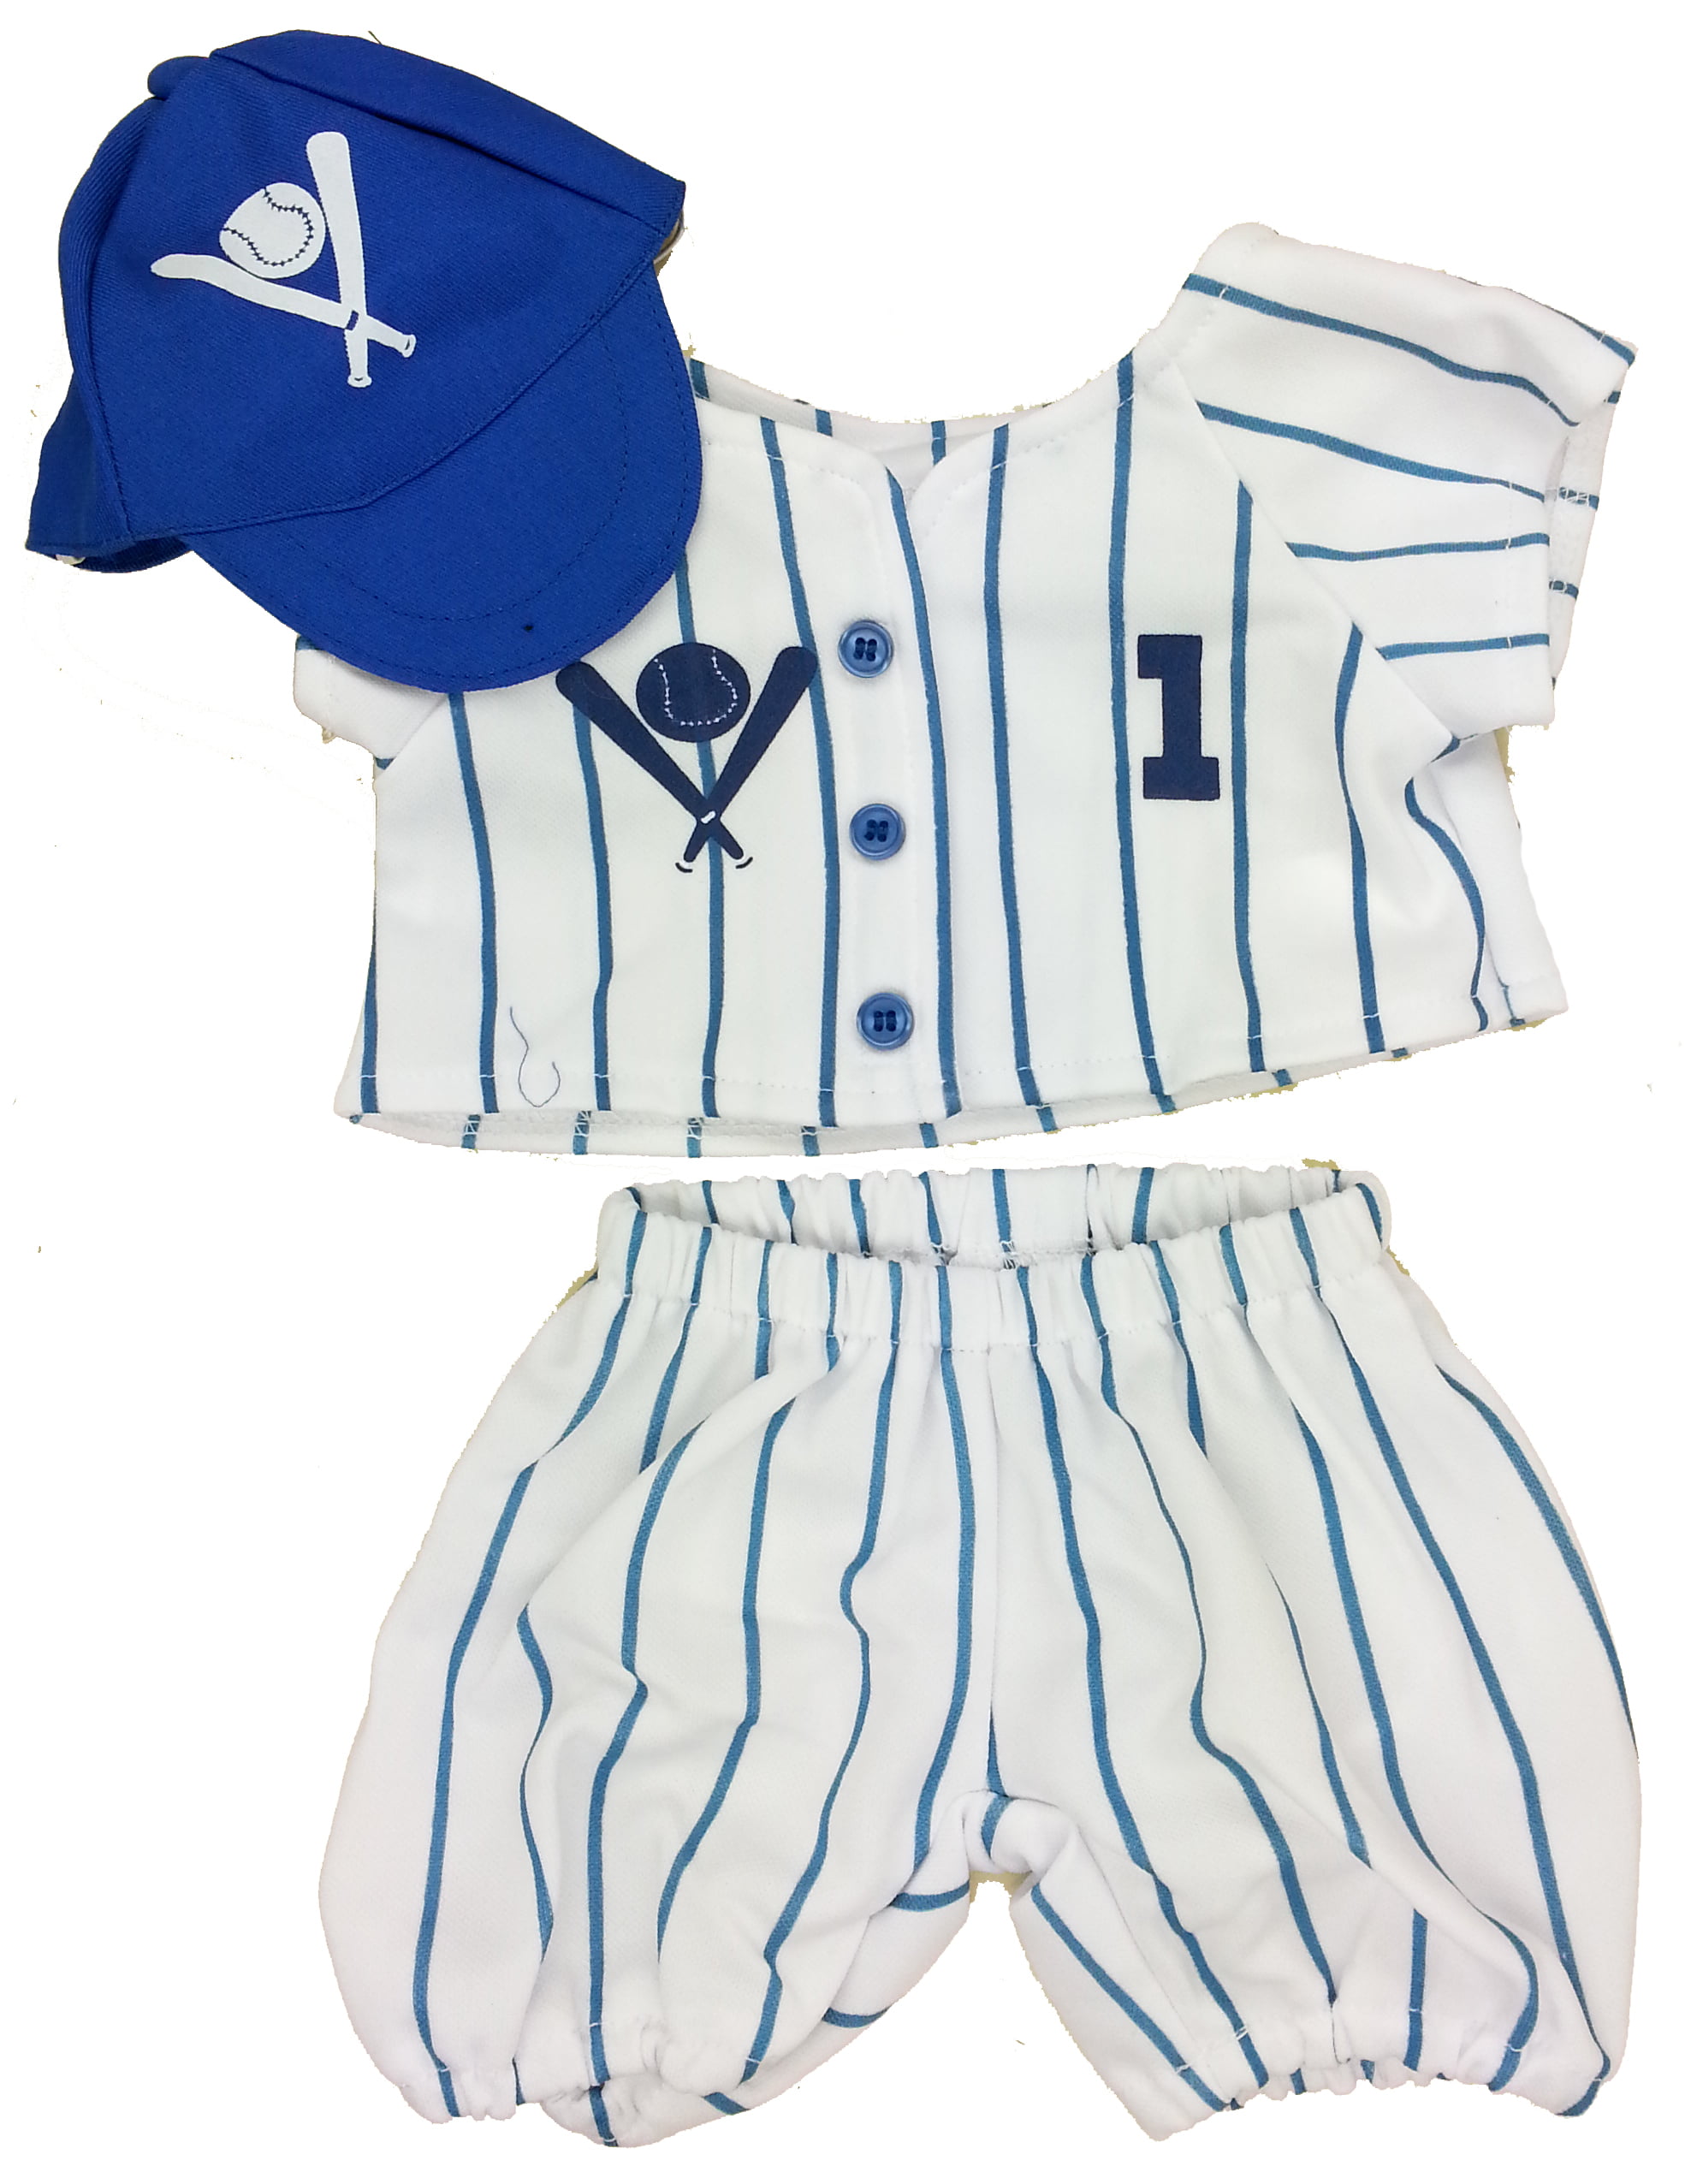 18" Build-a-bear and Make Your O Black Pinstripe Baseball Outfit Fits Most 14" 